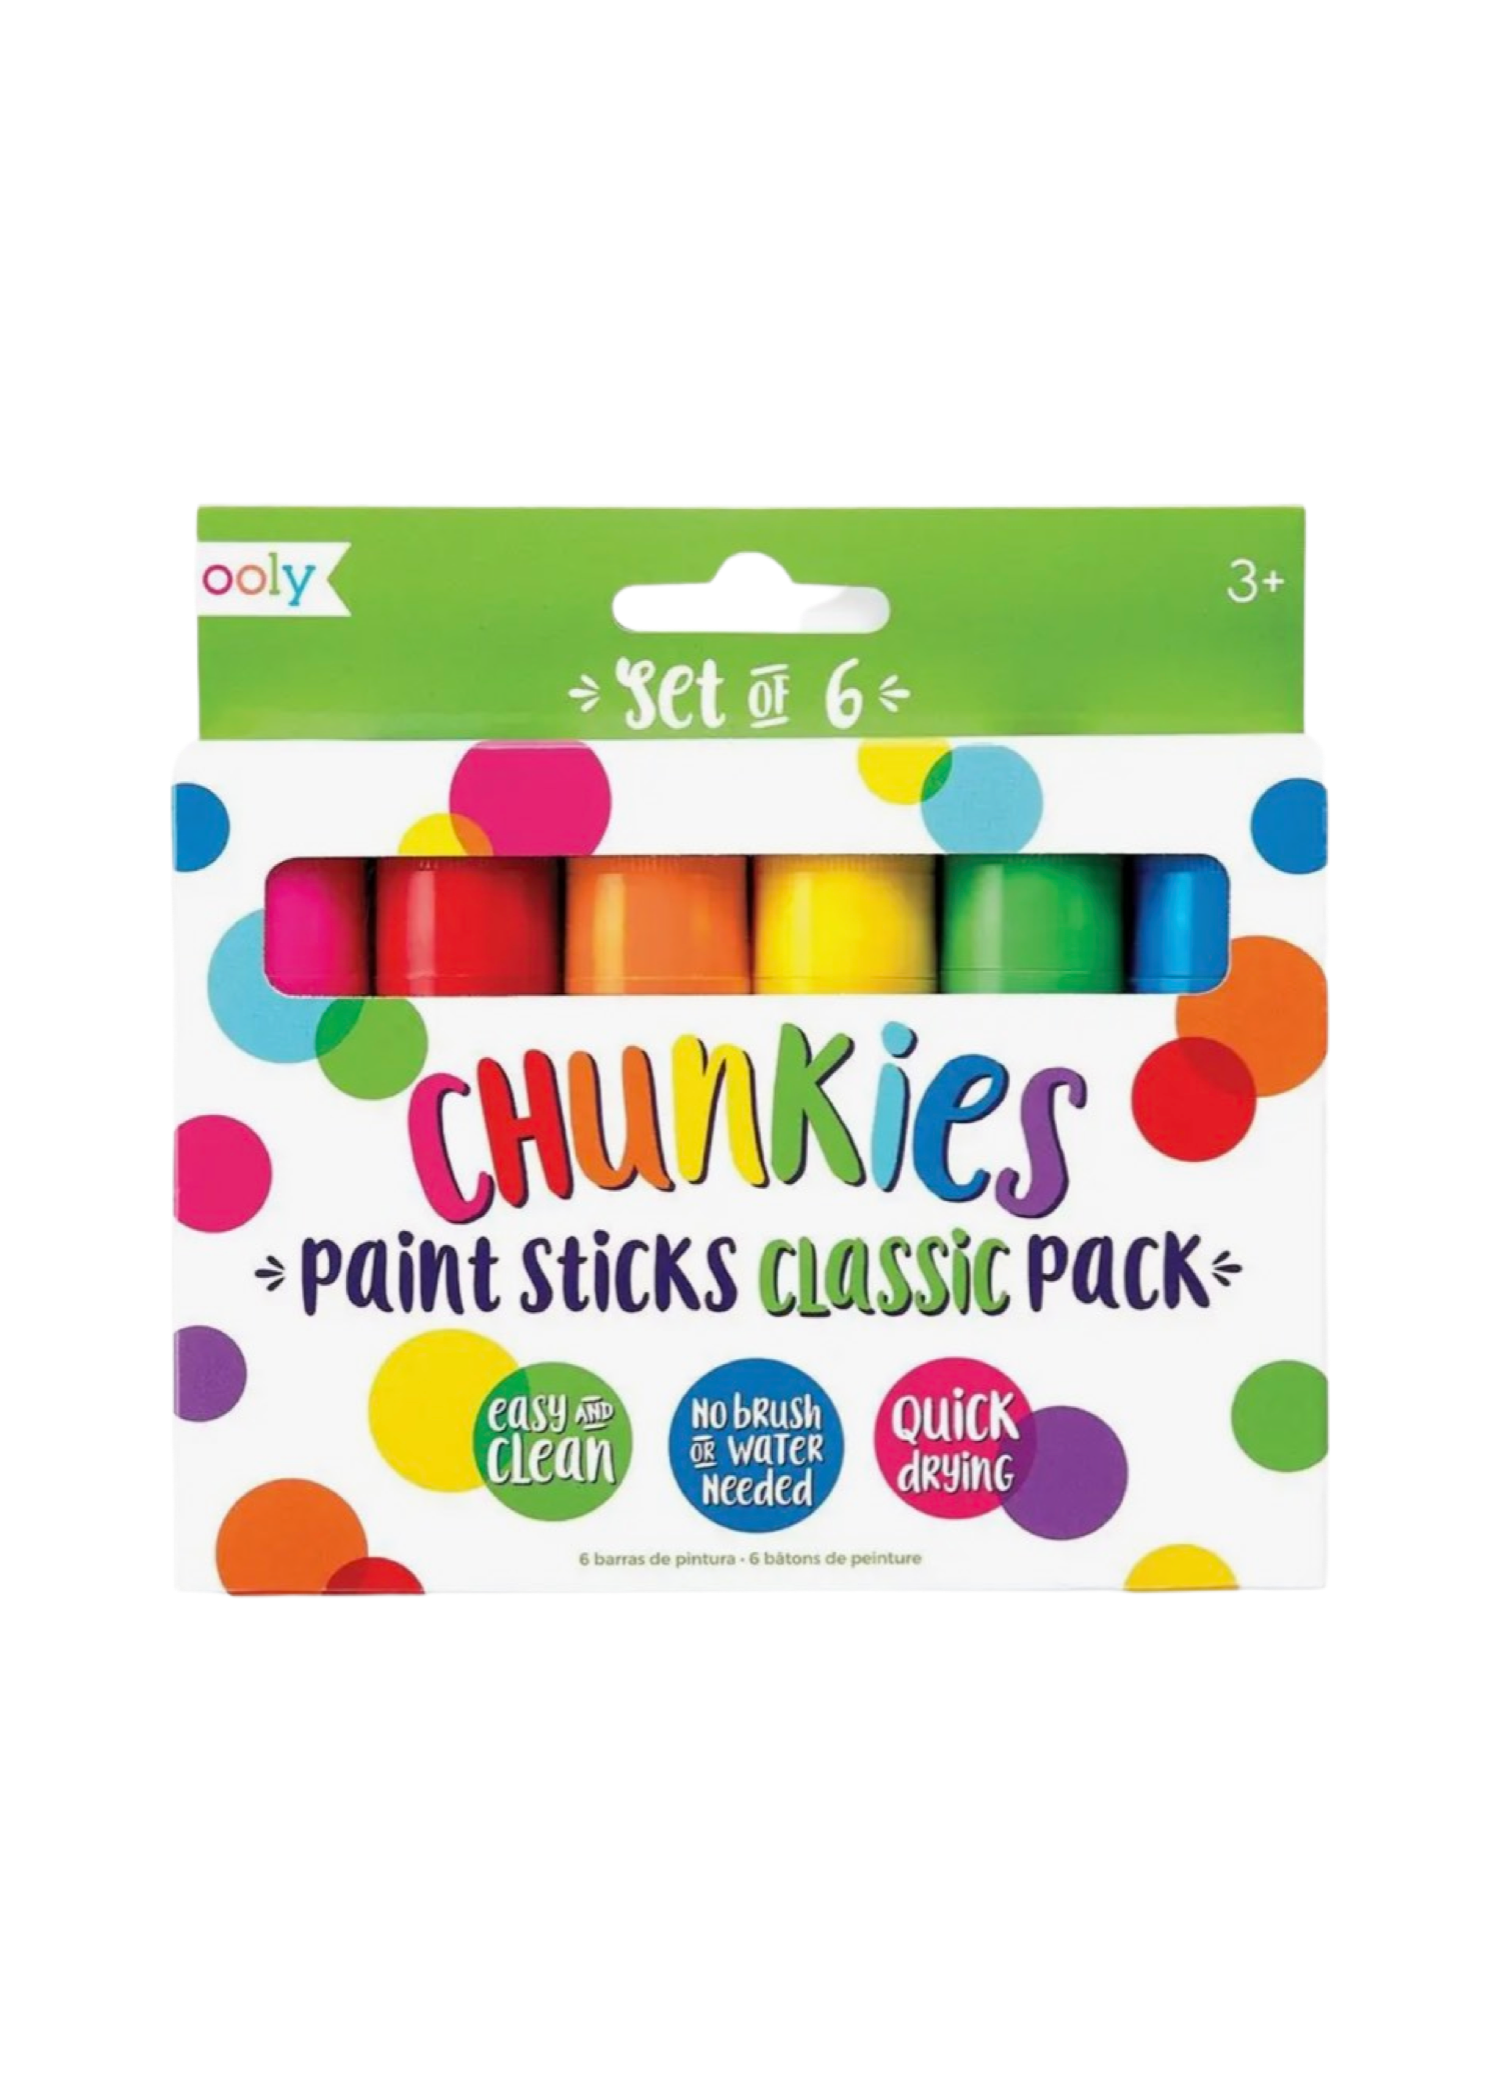  owkies Paint SHICKS CLASSIC PACK: 